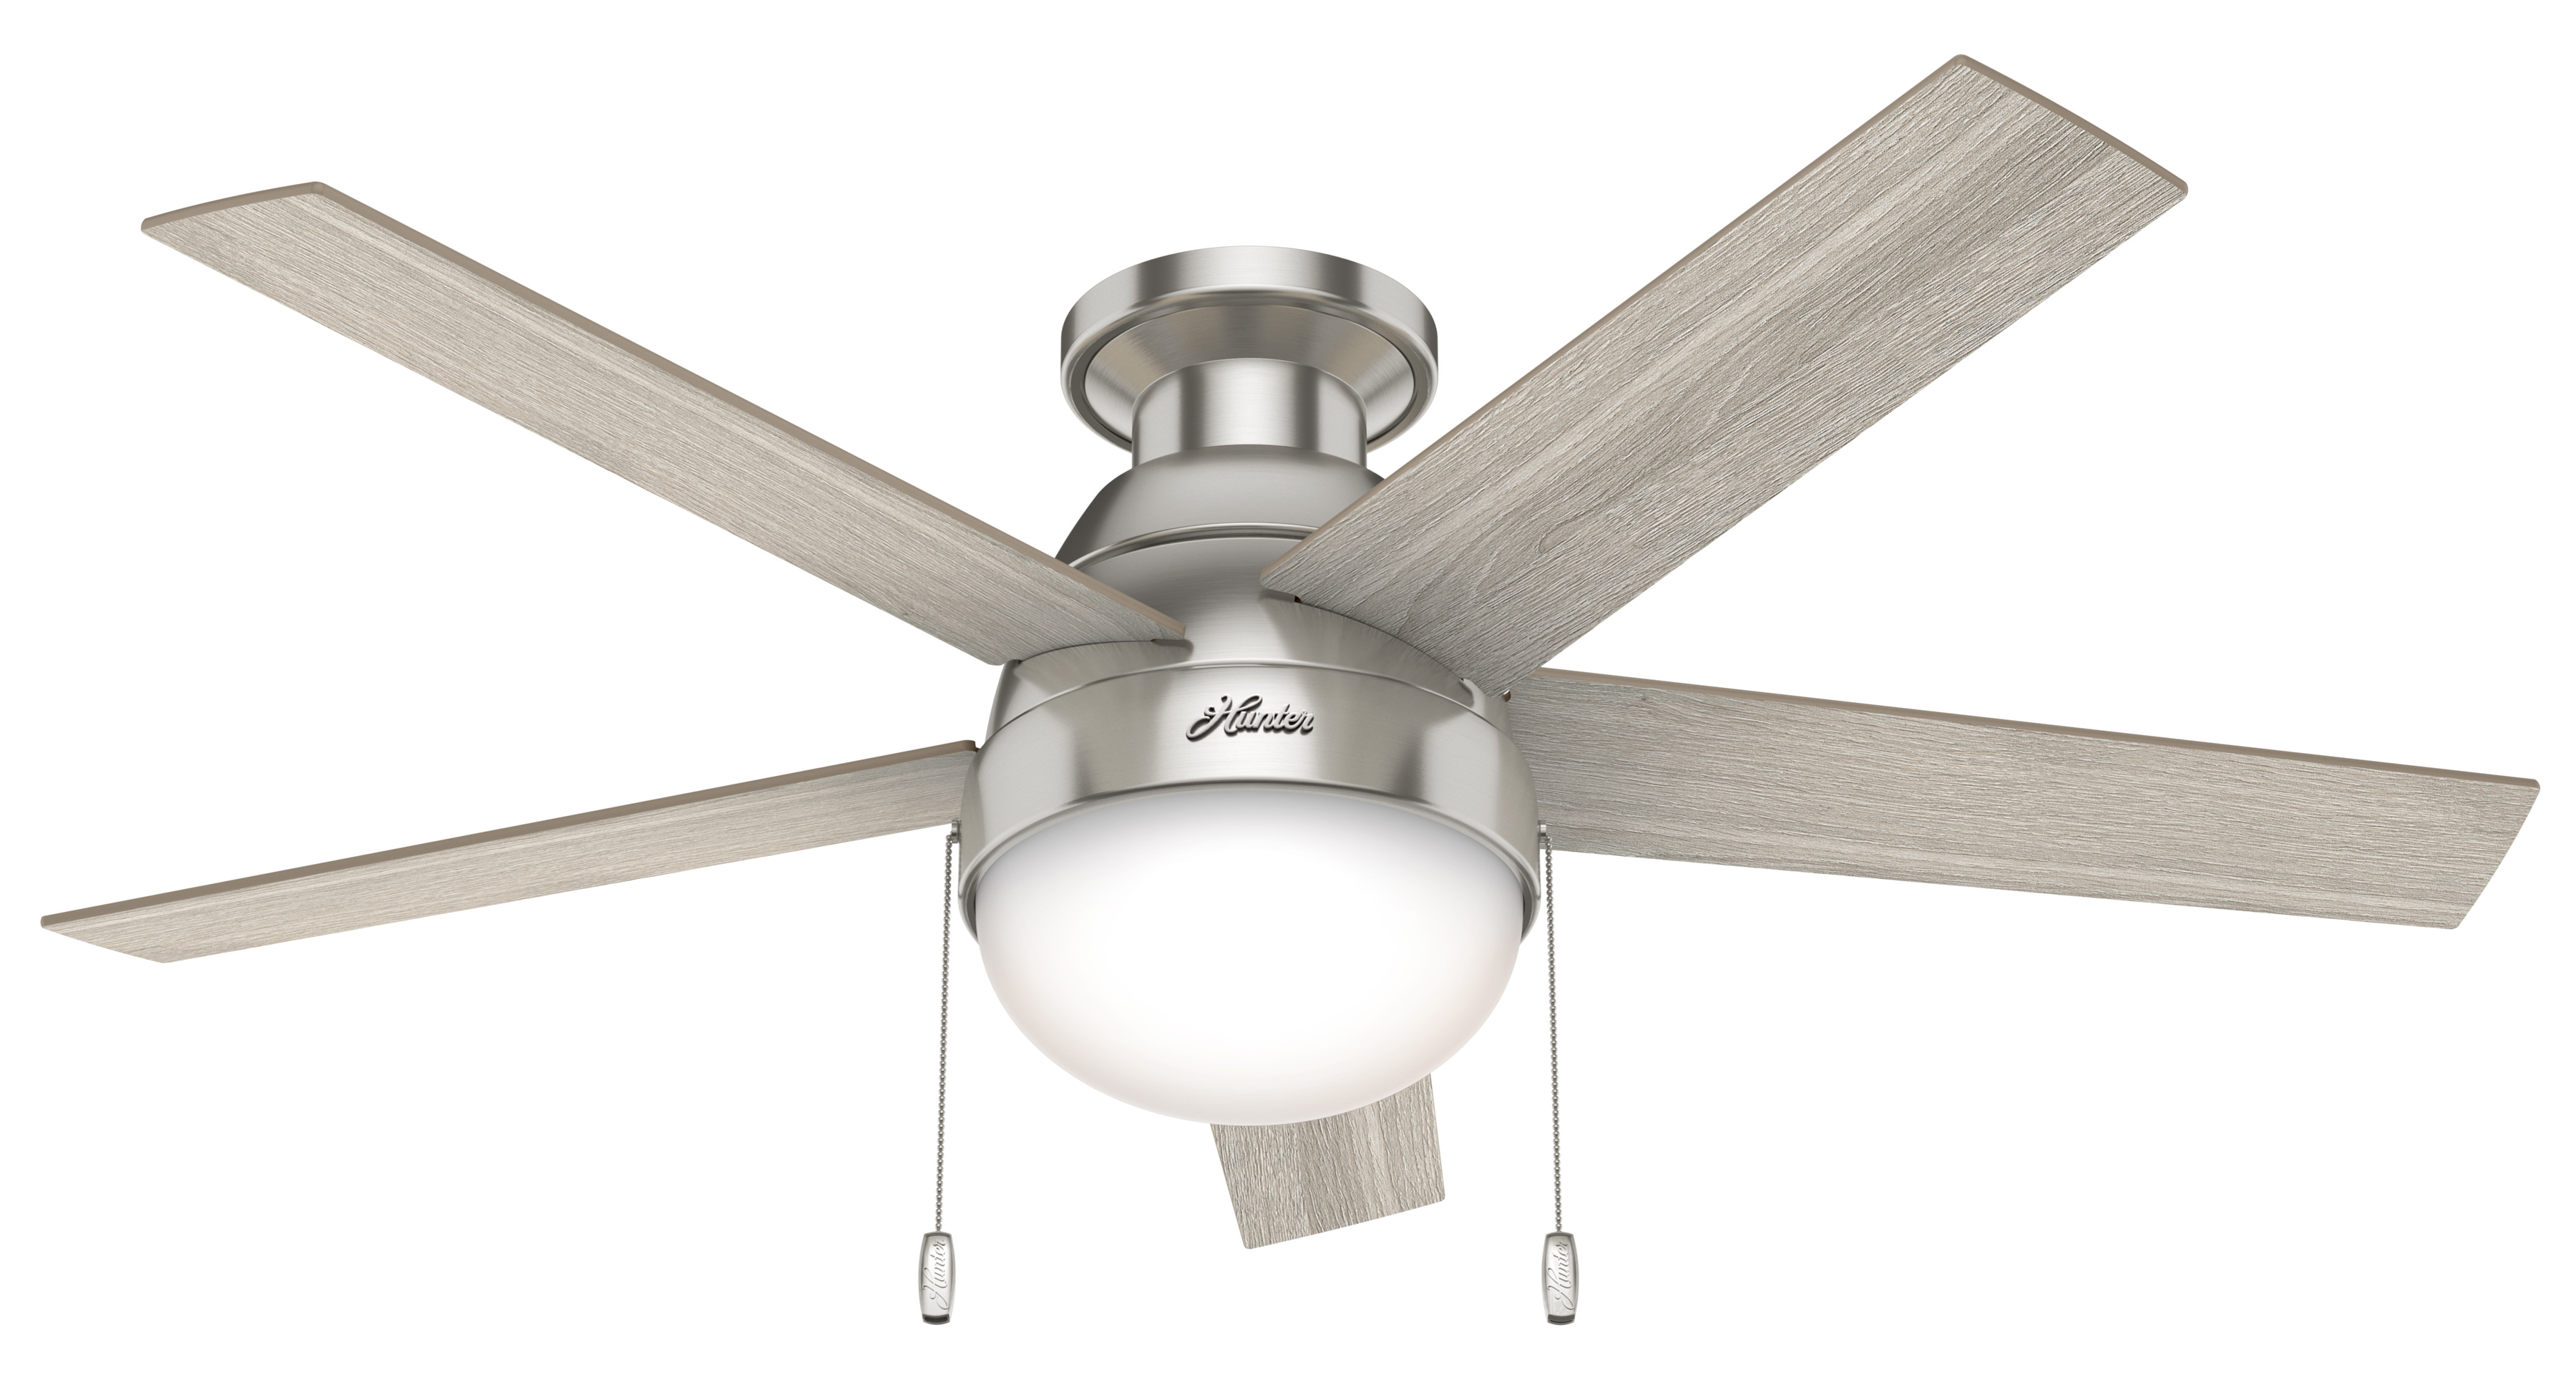 Hunter Fans 50278 Anslee Low Profile with Light 46 inch Ceiling Fan in Brushed Nickel